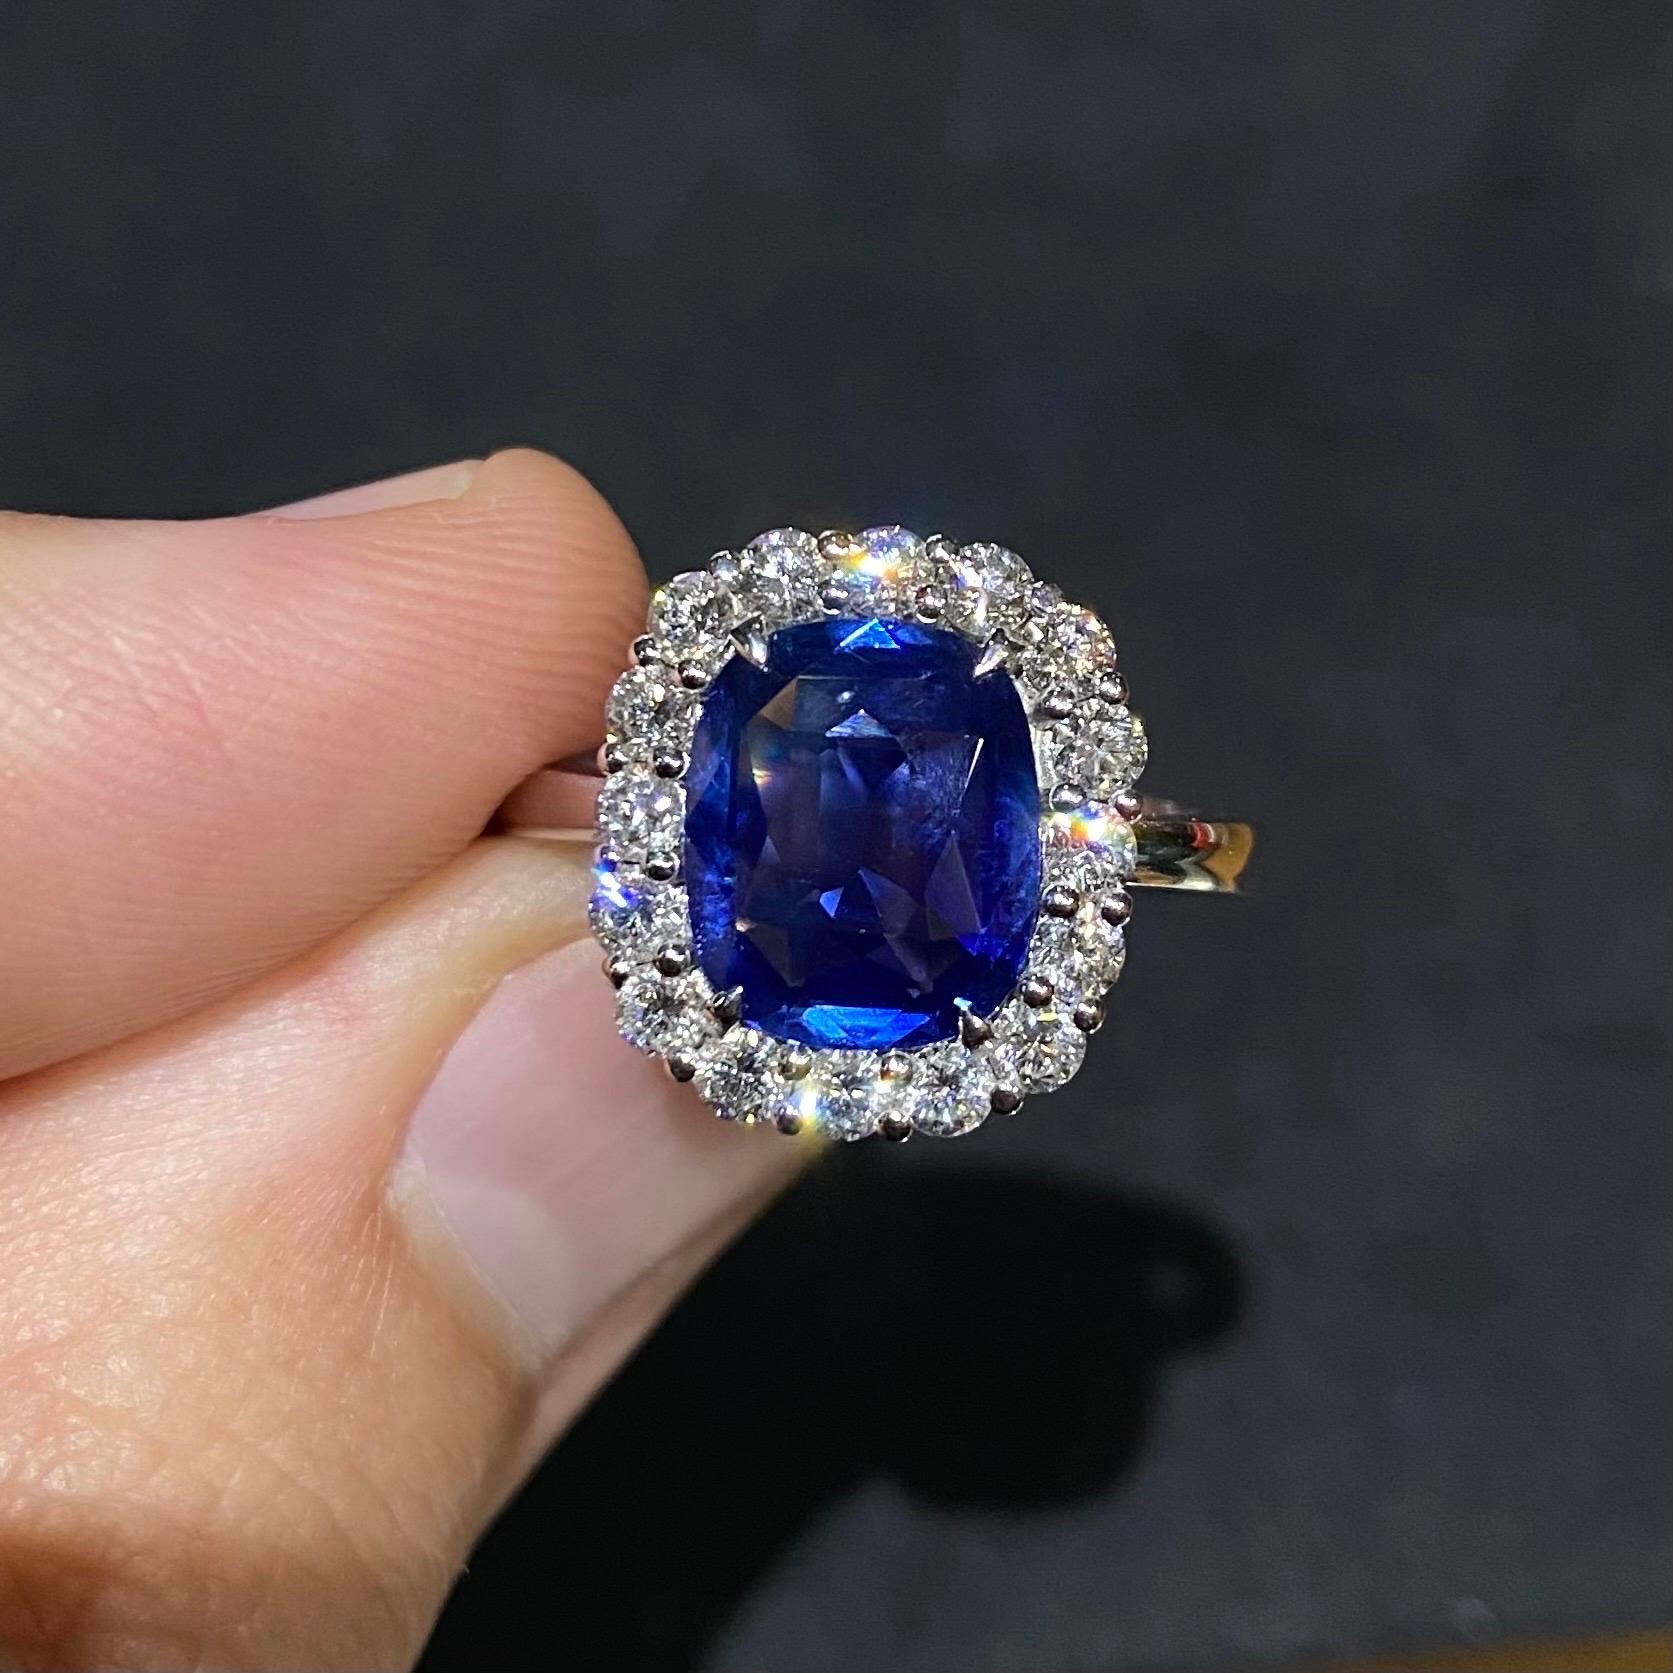 Contemporary 3.10 carats cornflower blue sapphire and diamond cluster engagement ring in 19.2kt white gold, Portuguese, circa 2021. This breathtaking jewel features a certified elongated cushion-cut sapphire of a deep cornflower blue color